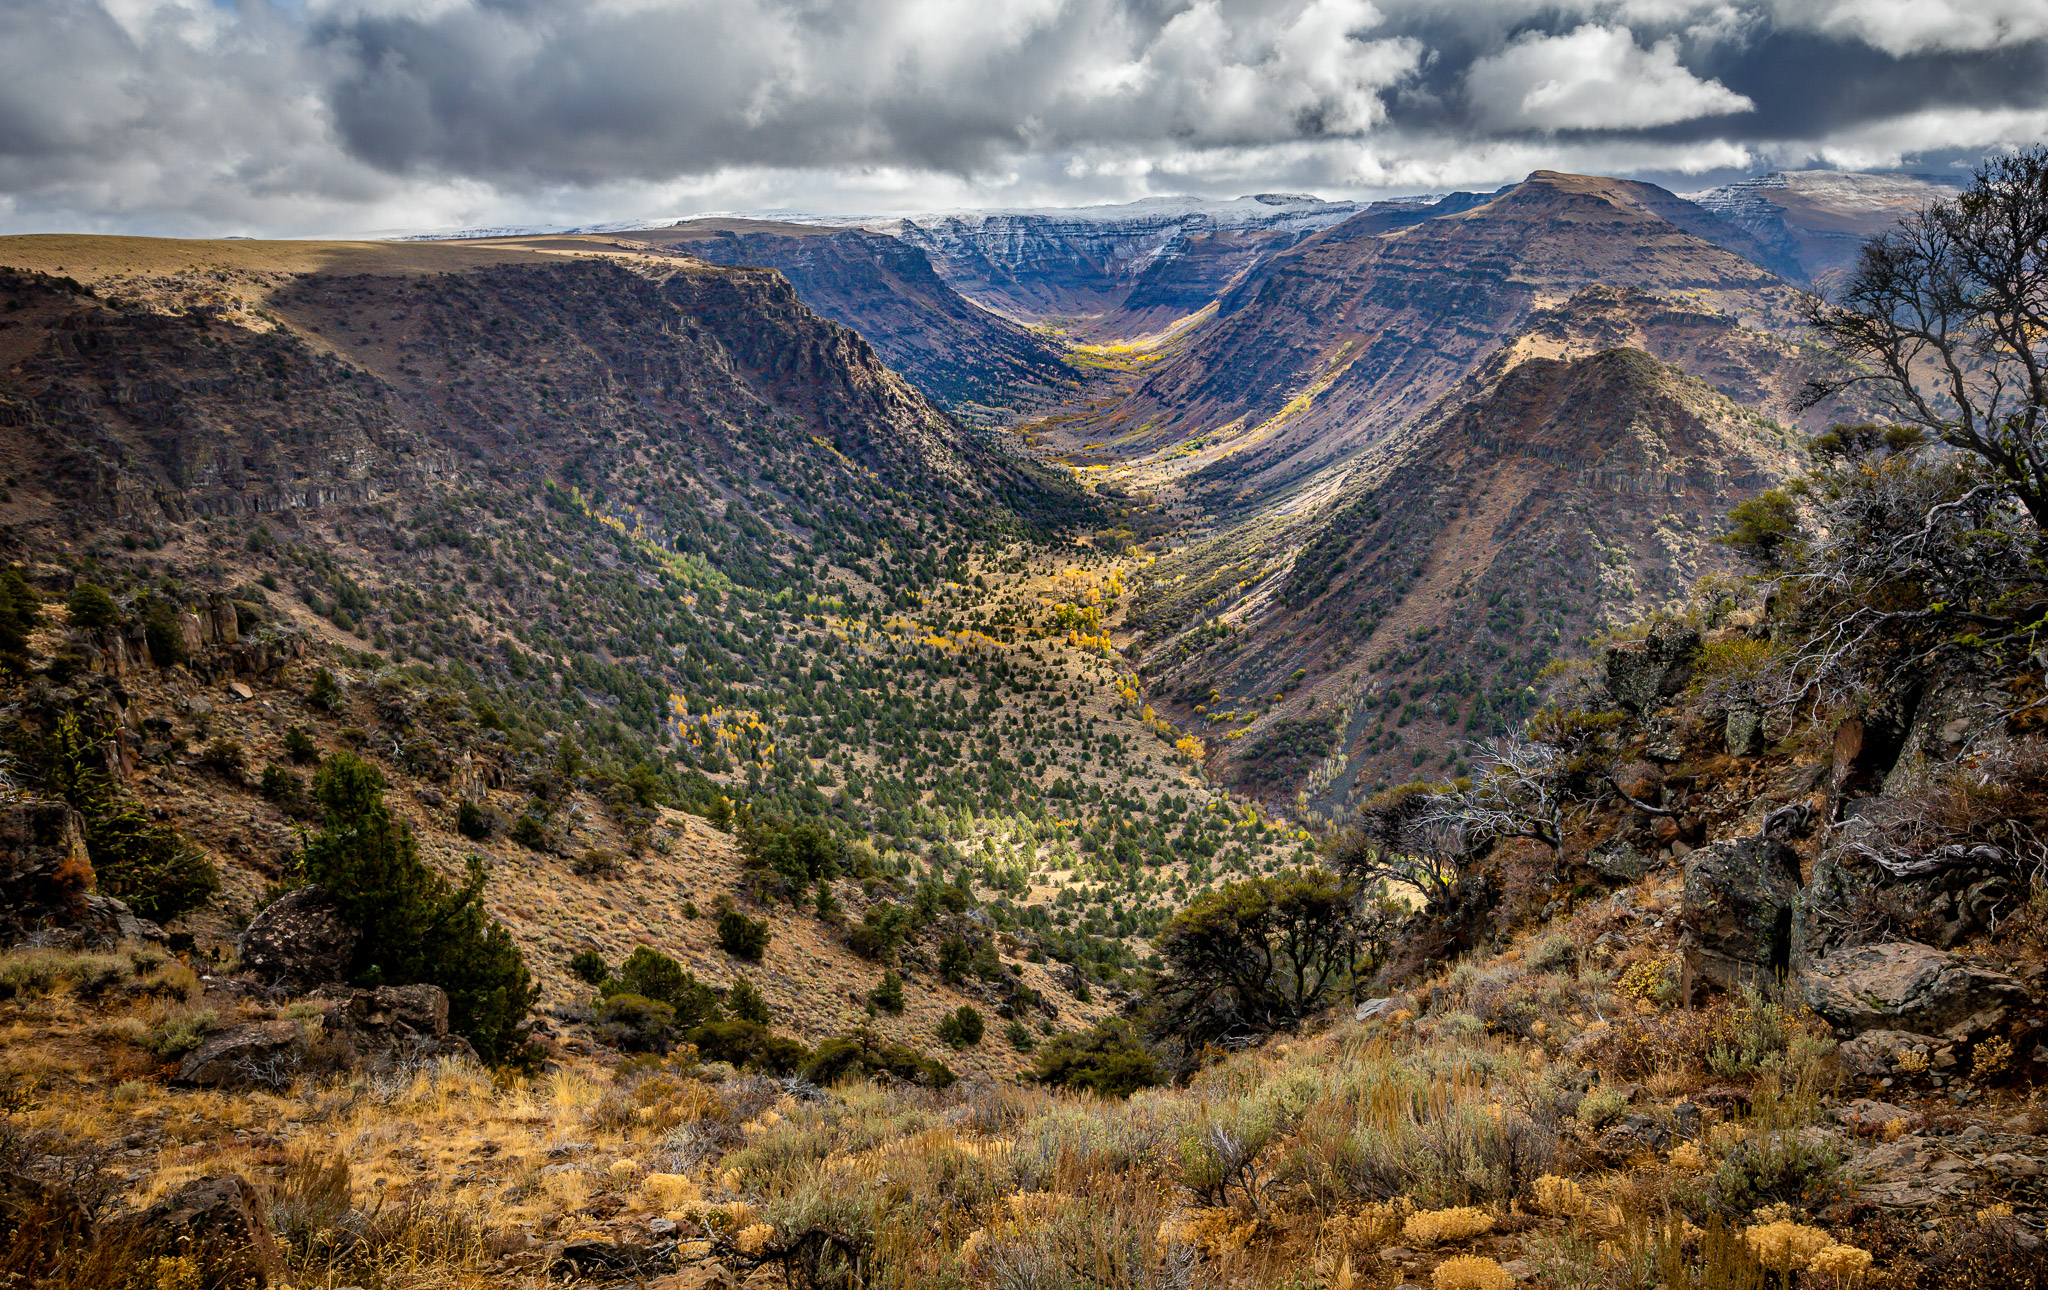 Steens Mountain's Big Indian Gorge